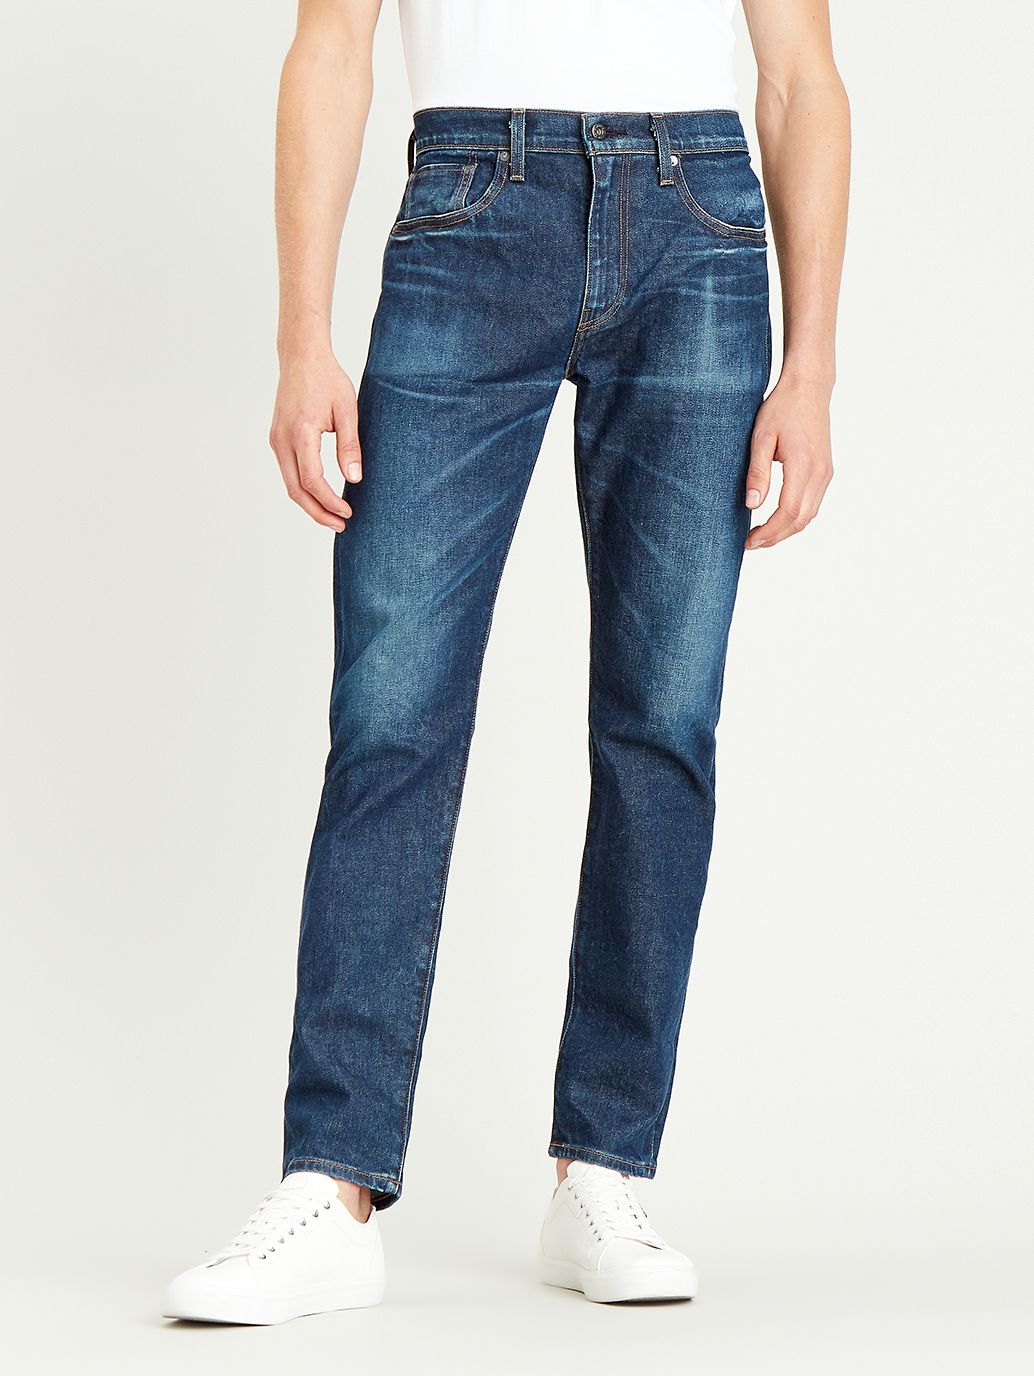 Buy Levi's® Made & Crafted® Made in Japan 502™ Taper Fit Jeans | Levi’s ...